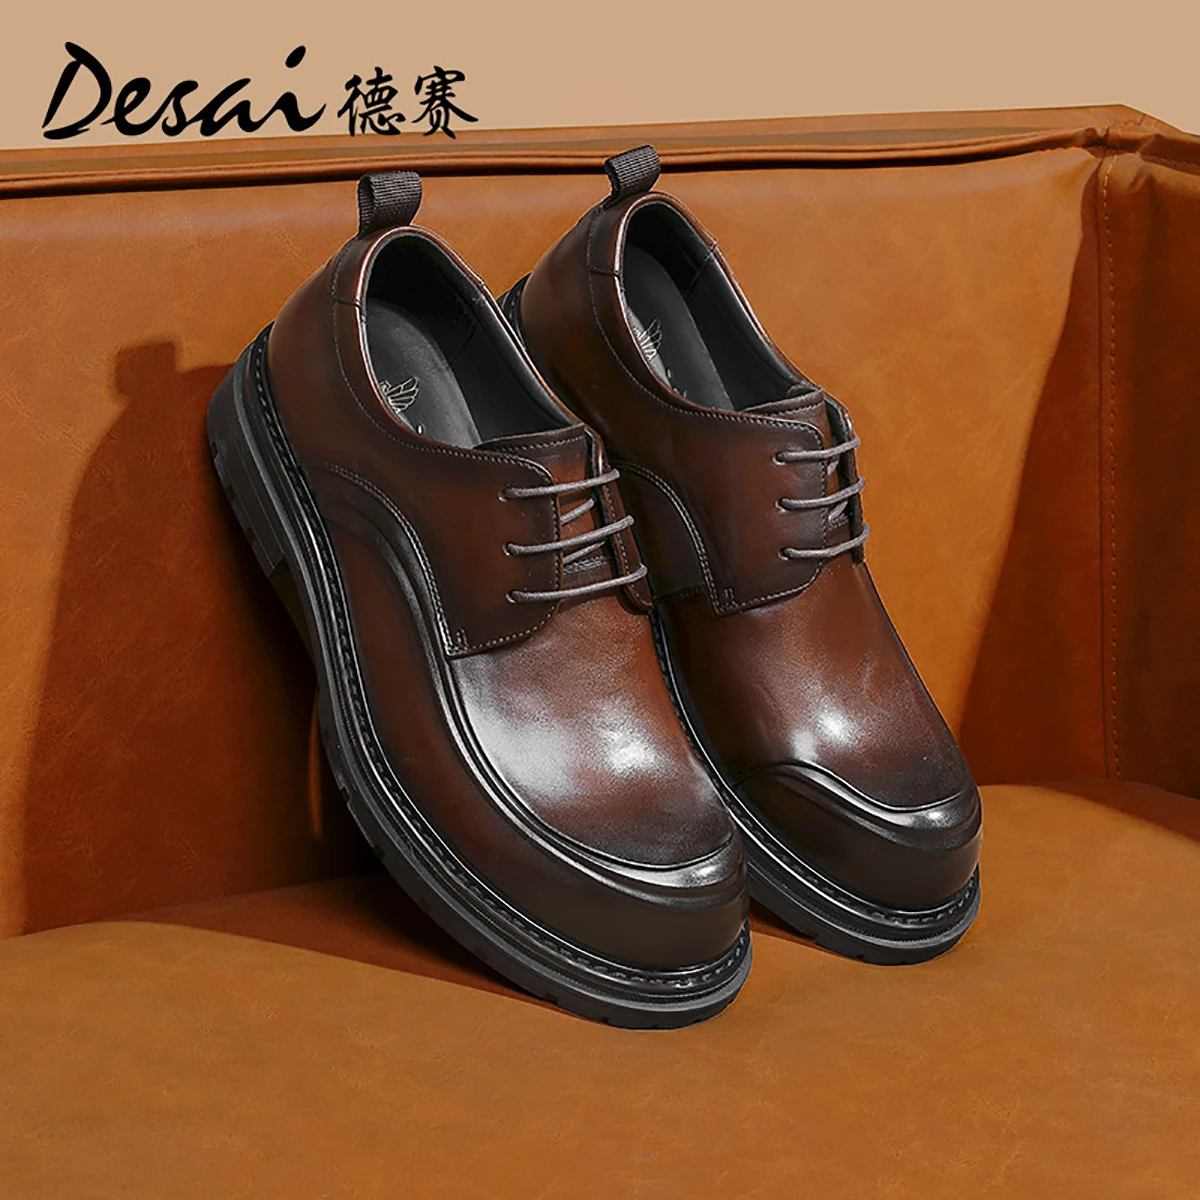 Desai England platform height increase casual leather shoes leather business formal Derby shoes retro low top commuter men's sho